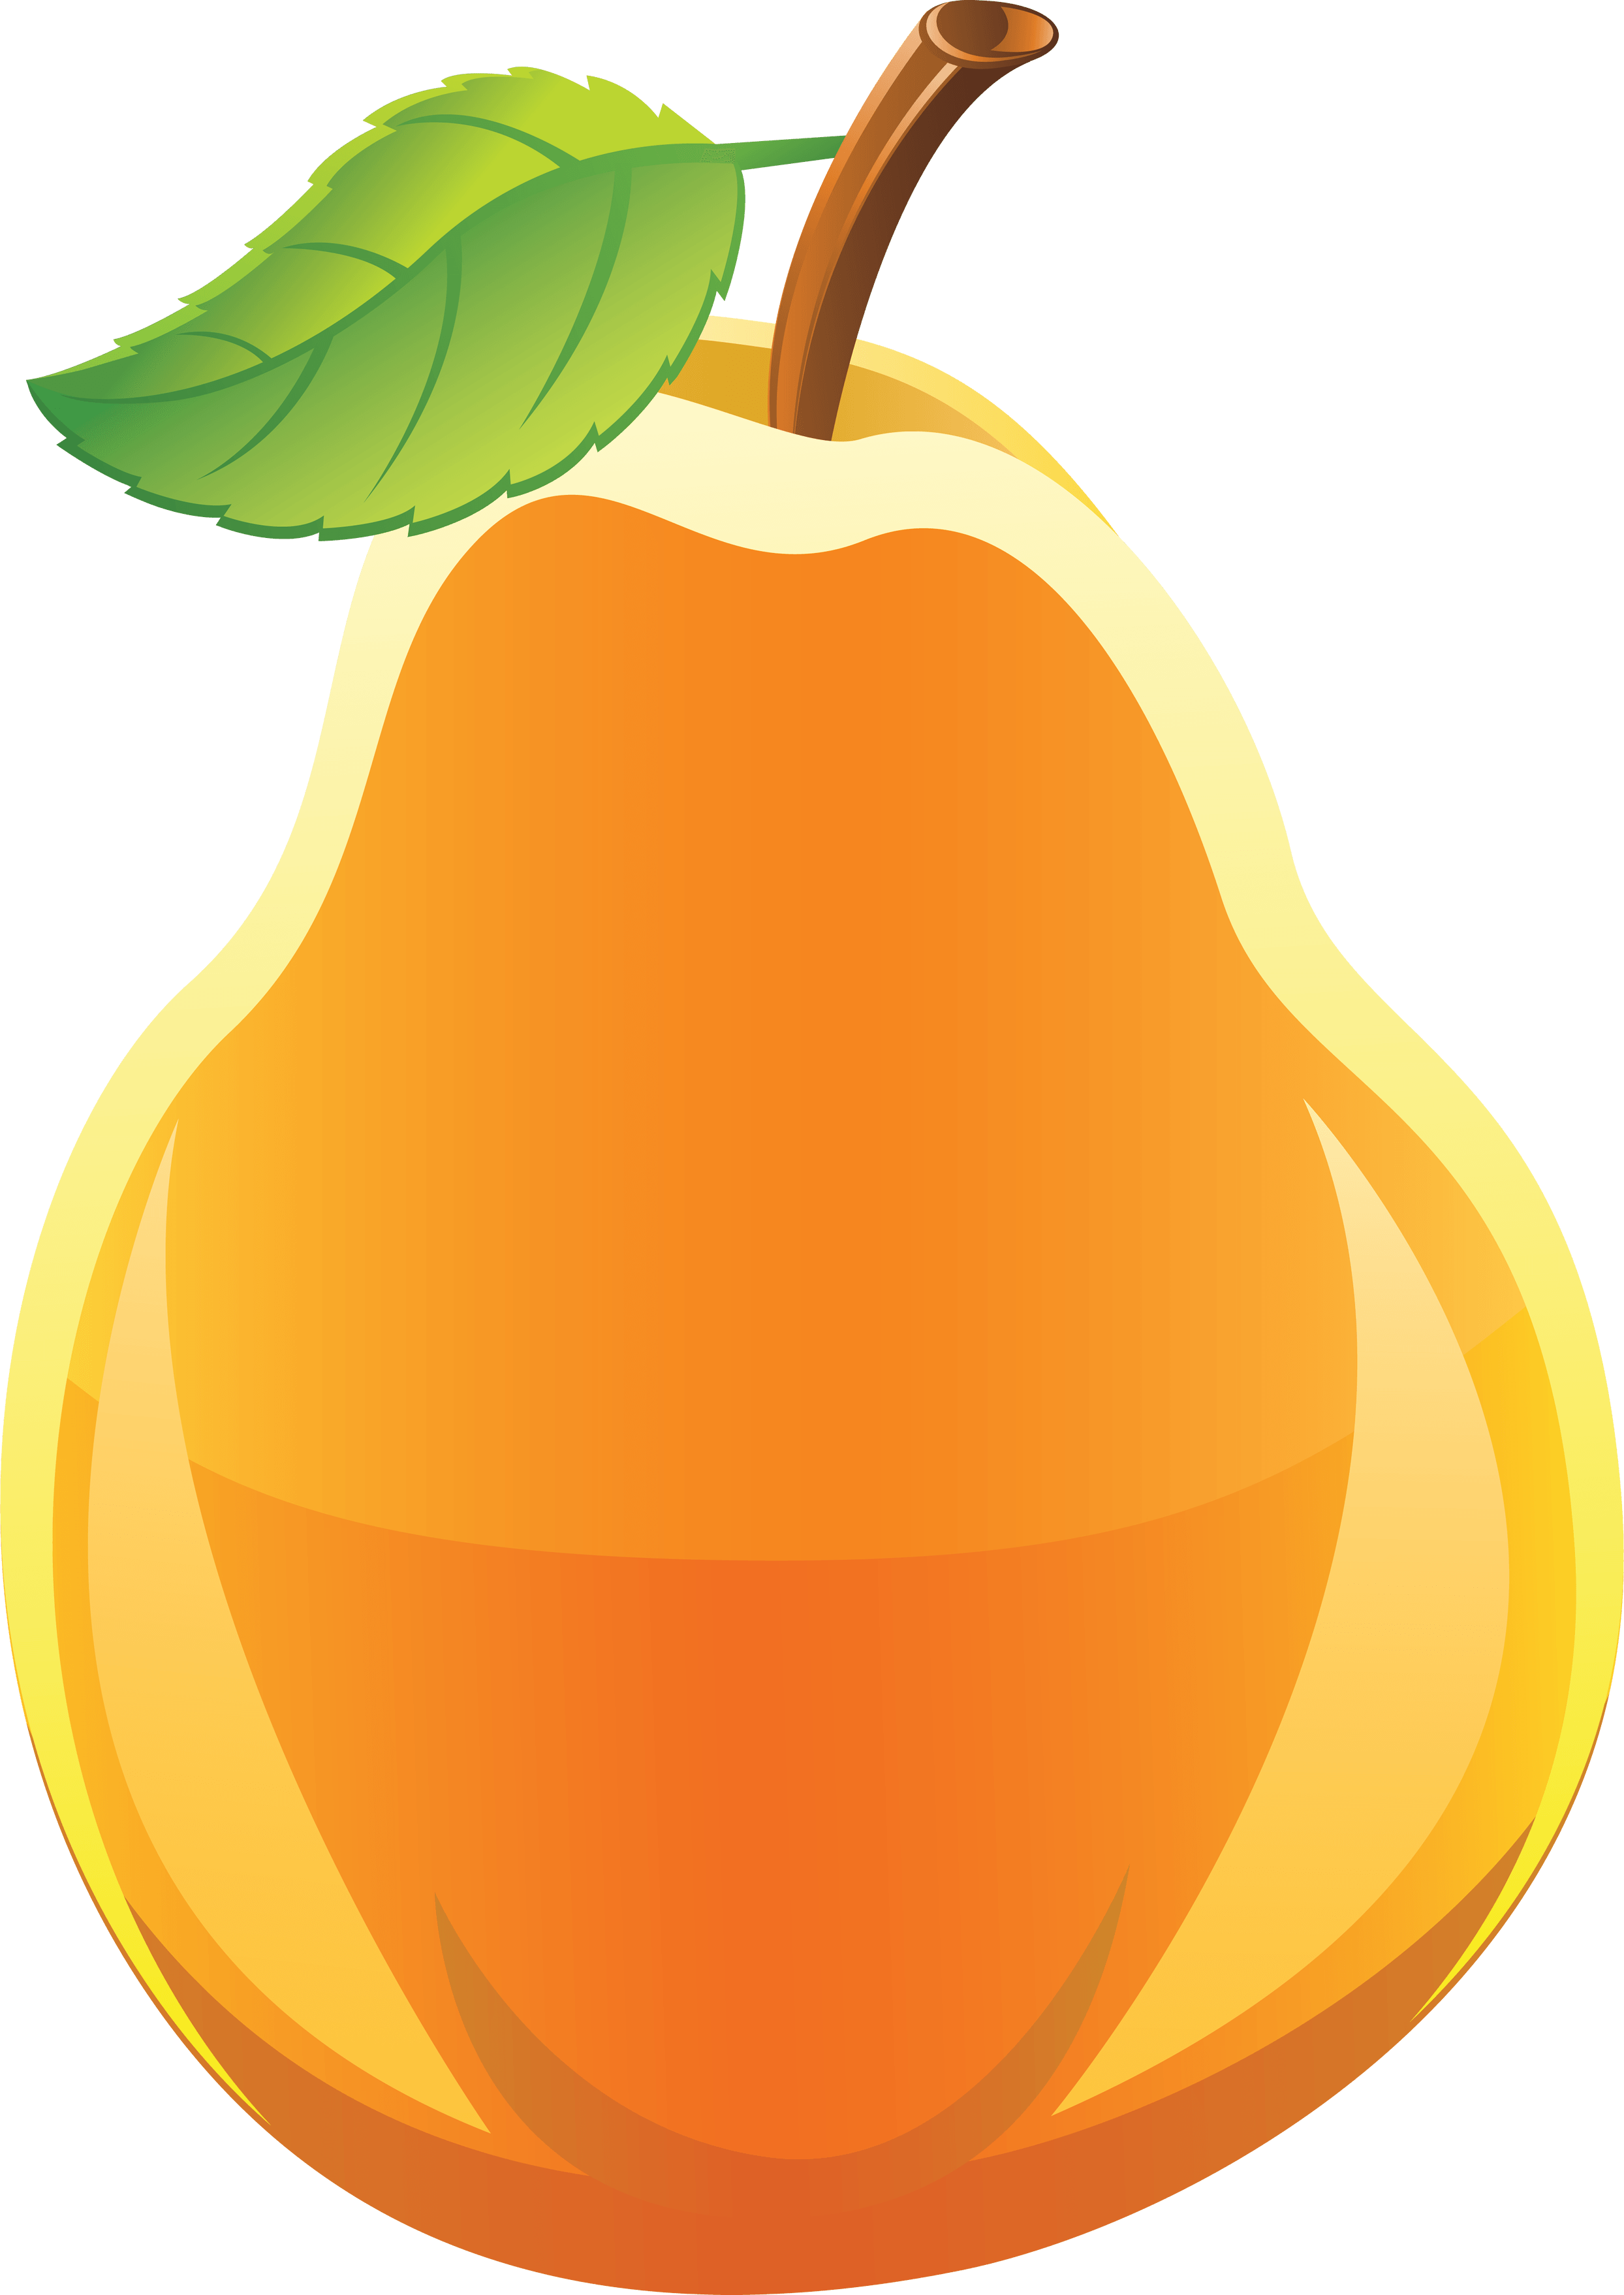 Peach Pear Difference Strawberry Cherries PNG